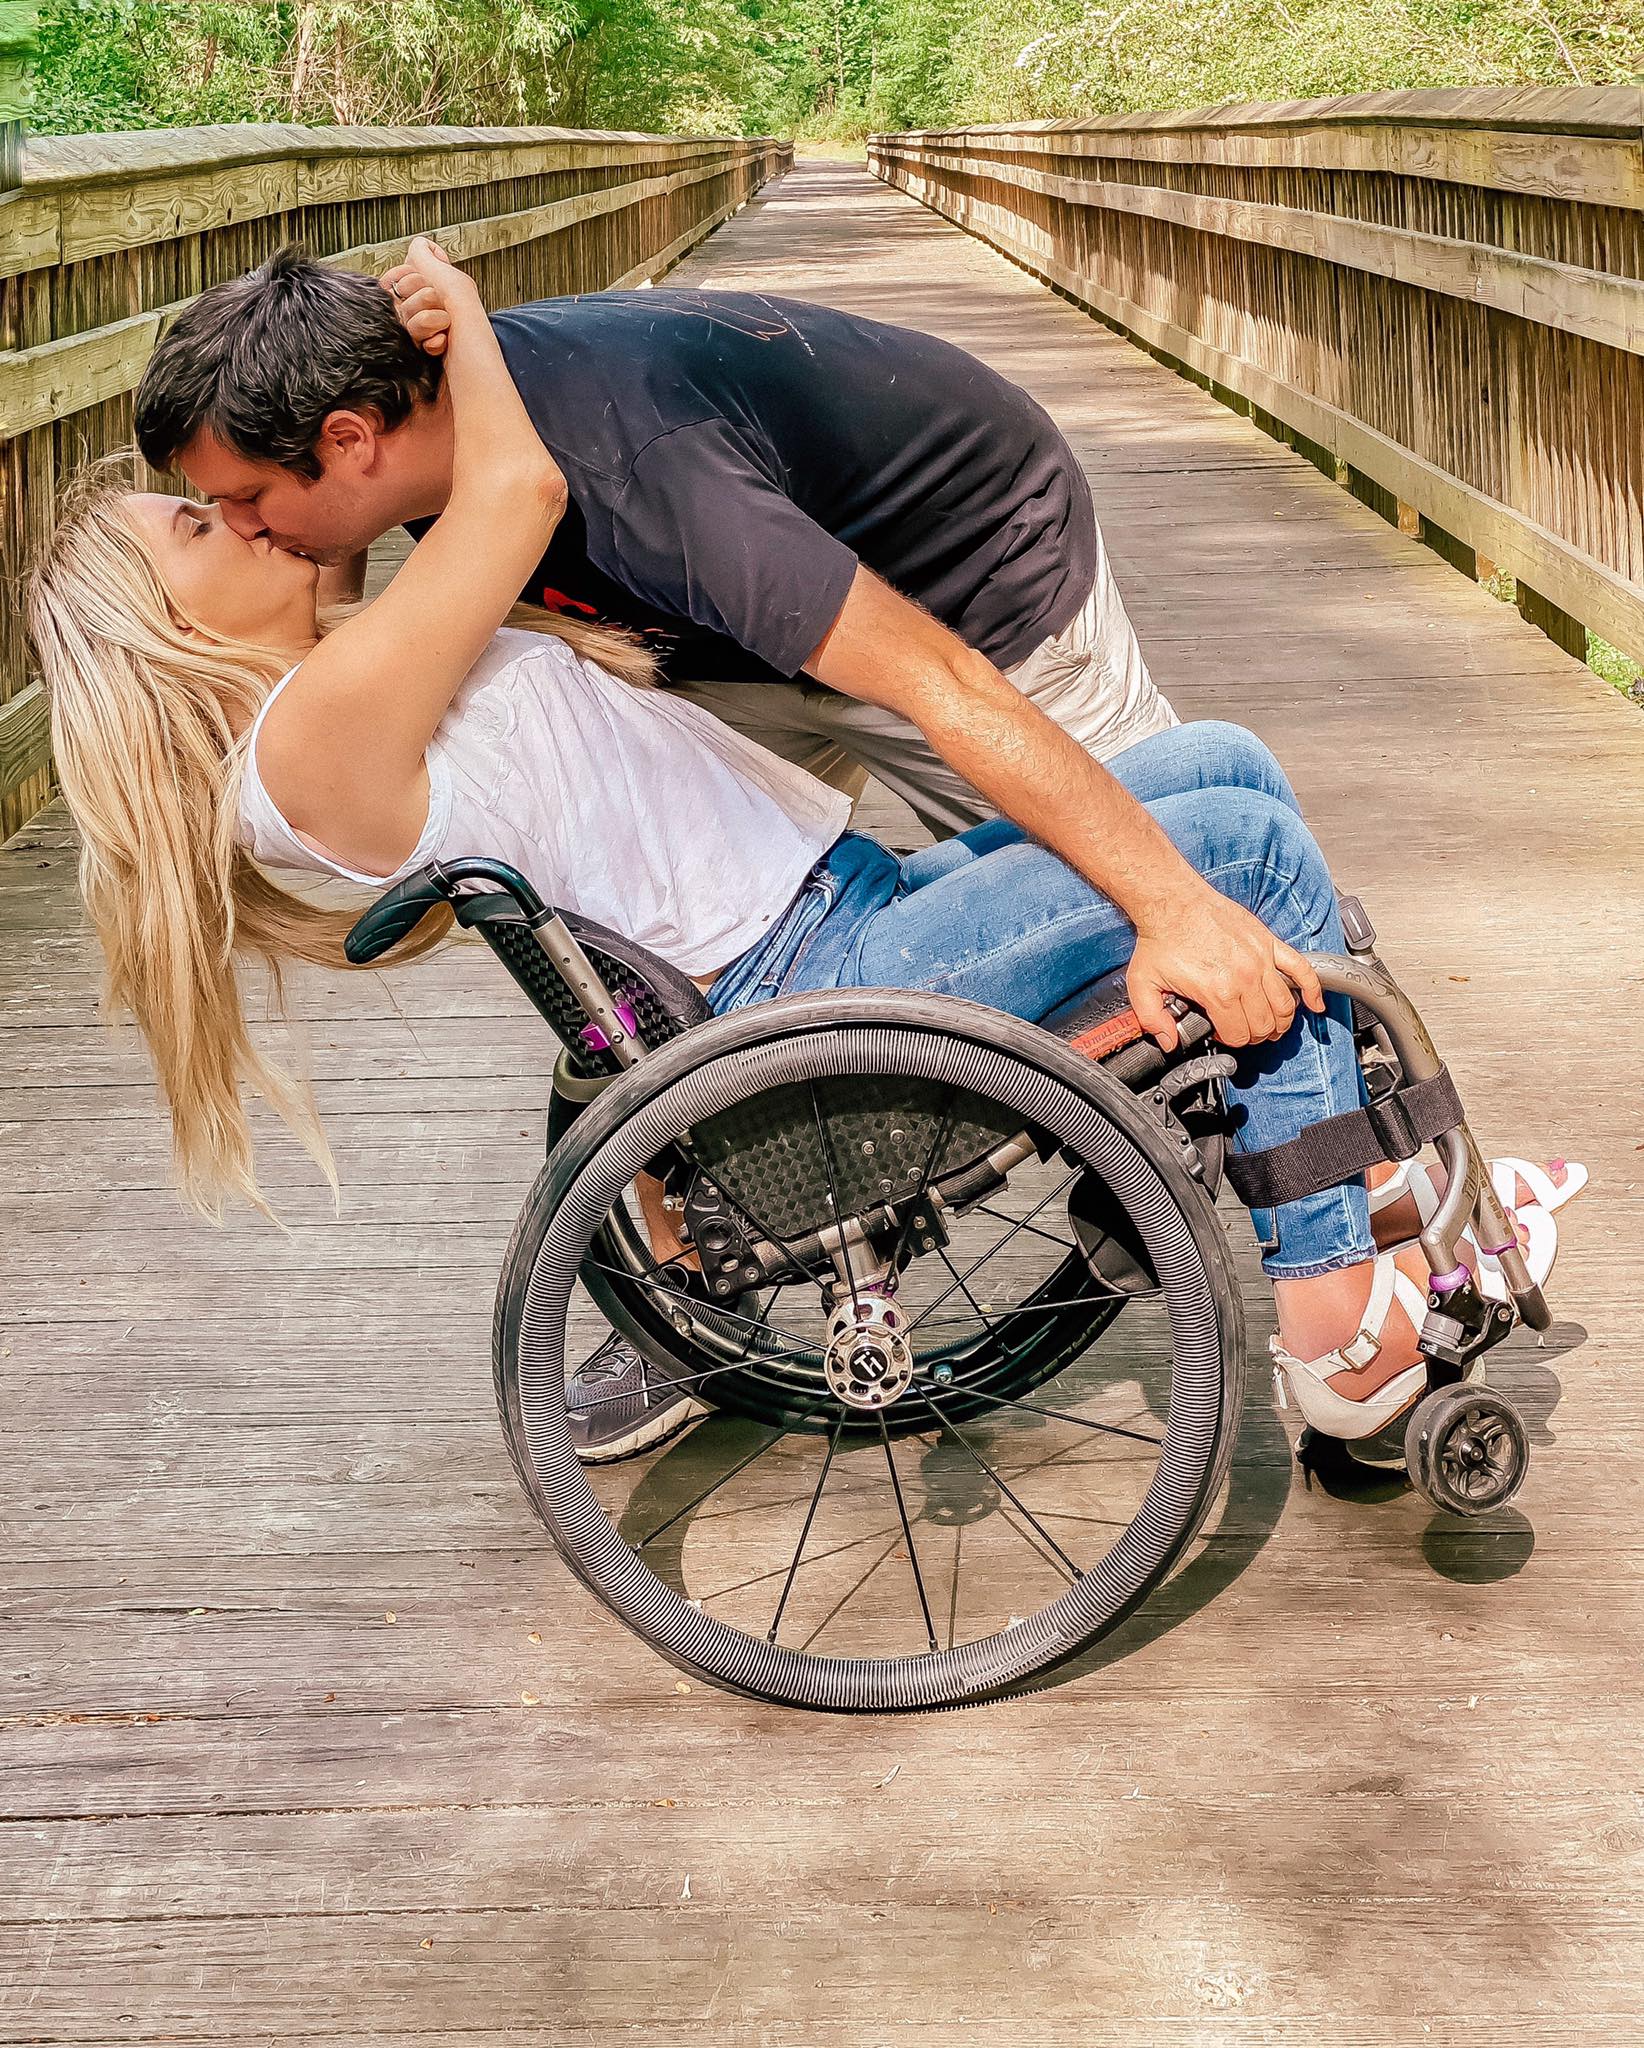 Rachelle Chapman's wedding to Chris was delayed after she suffered paralysis from an accident at her bachlorette party.